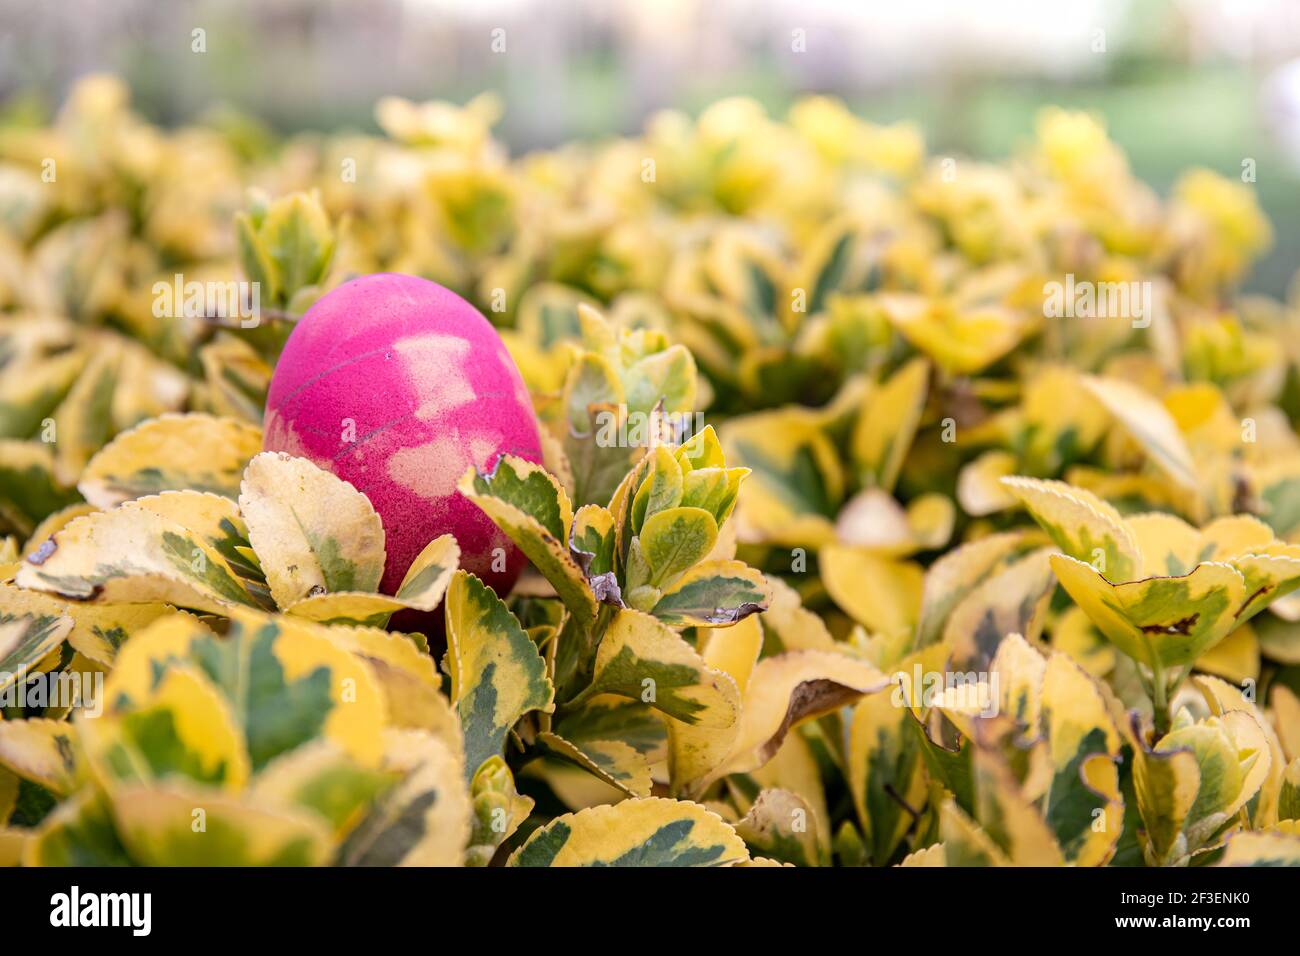 Ready for an Easter eggs hunt? A pink egg lays on the top of a green and yellow bush waiting for a child to find it. Stock Photo